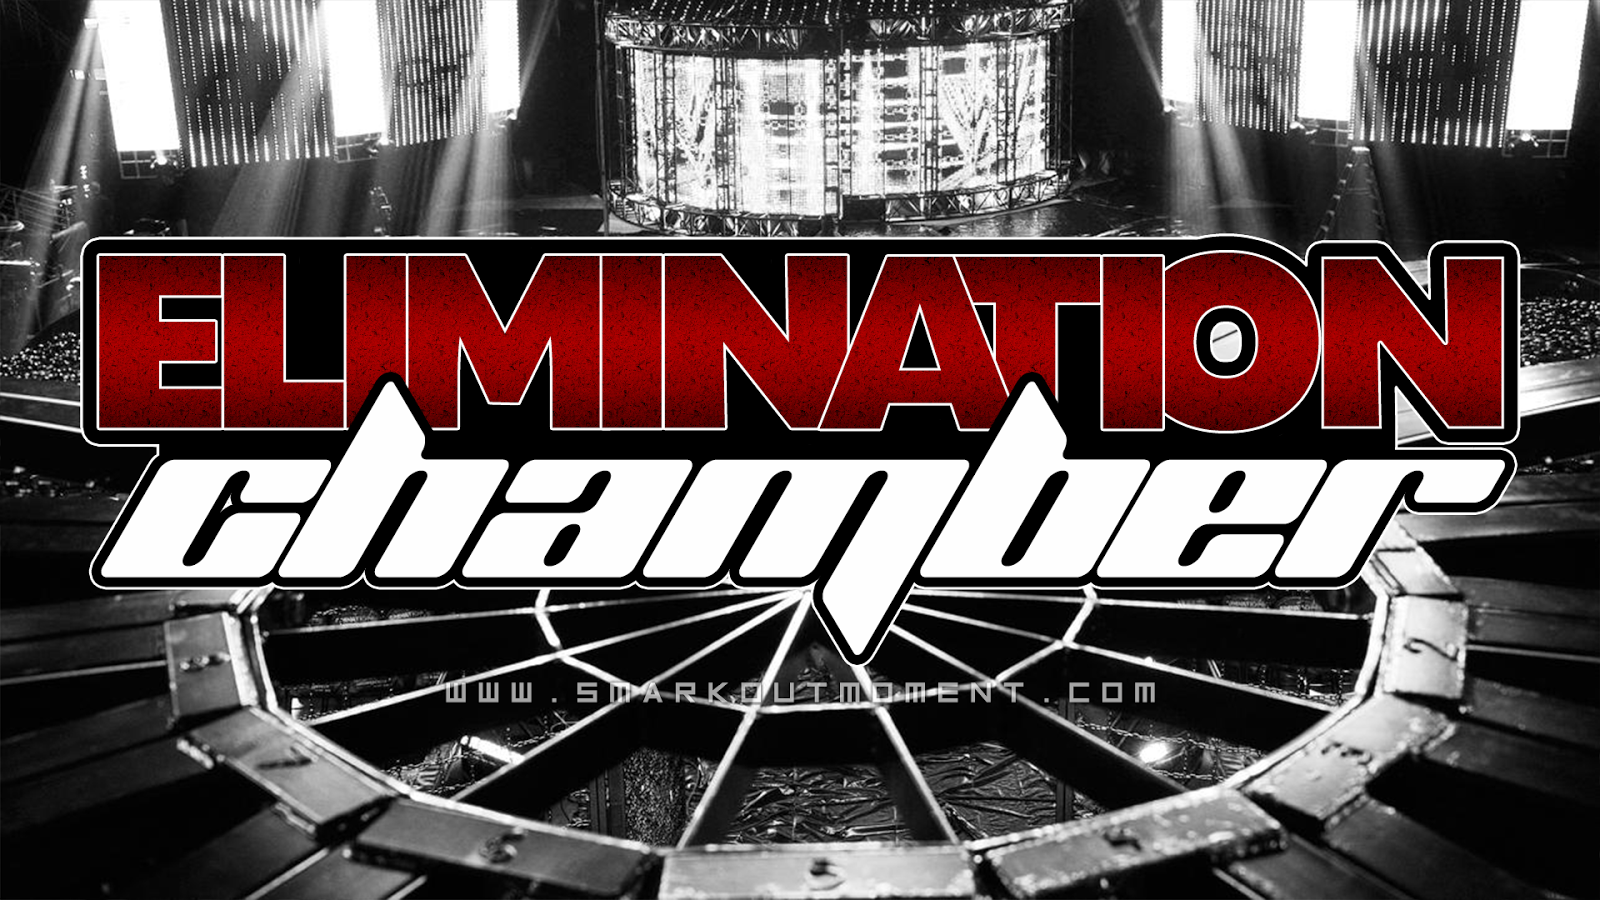 Wwe Elimination Chamber Ppv Wallpaper Posters And Logo Backgrounds Smark Out Moment